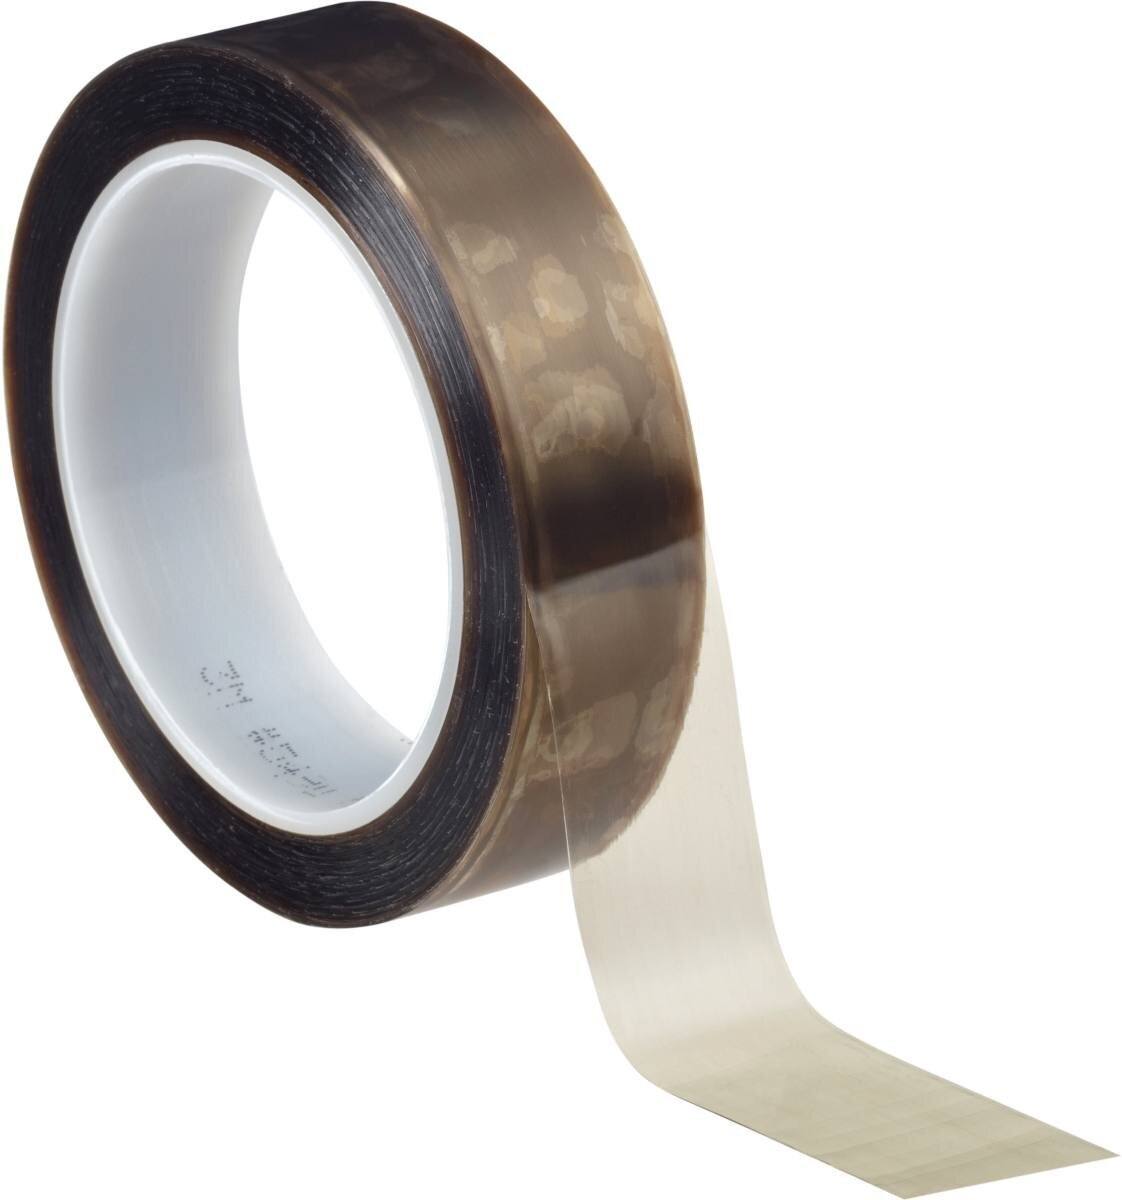 3M 5490 PTFE extruded film adhesive tape 19mmx33m, 0.09mm, silicone